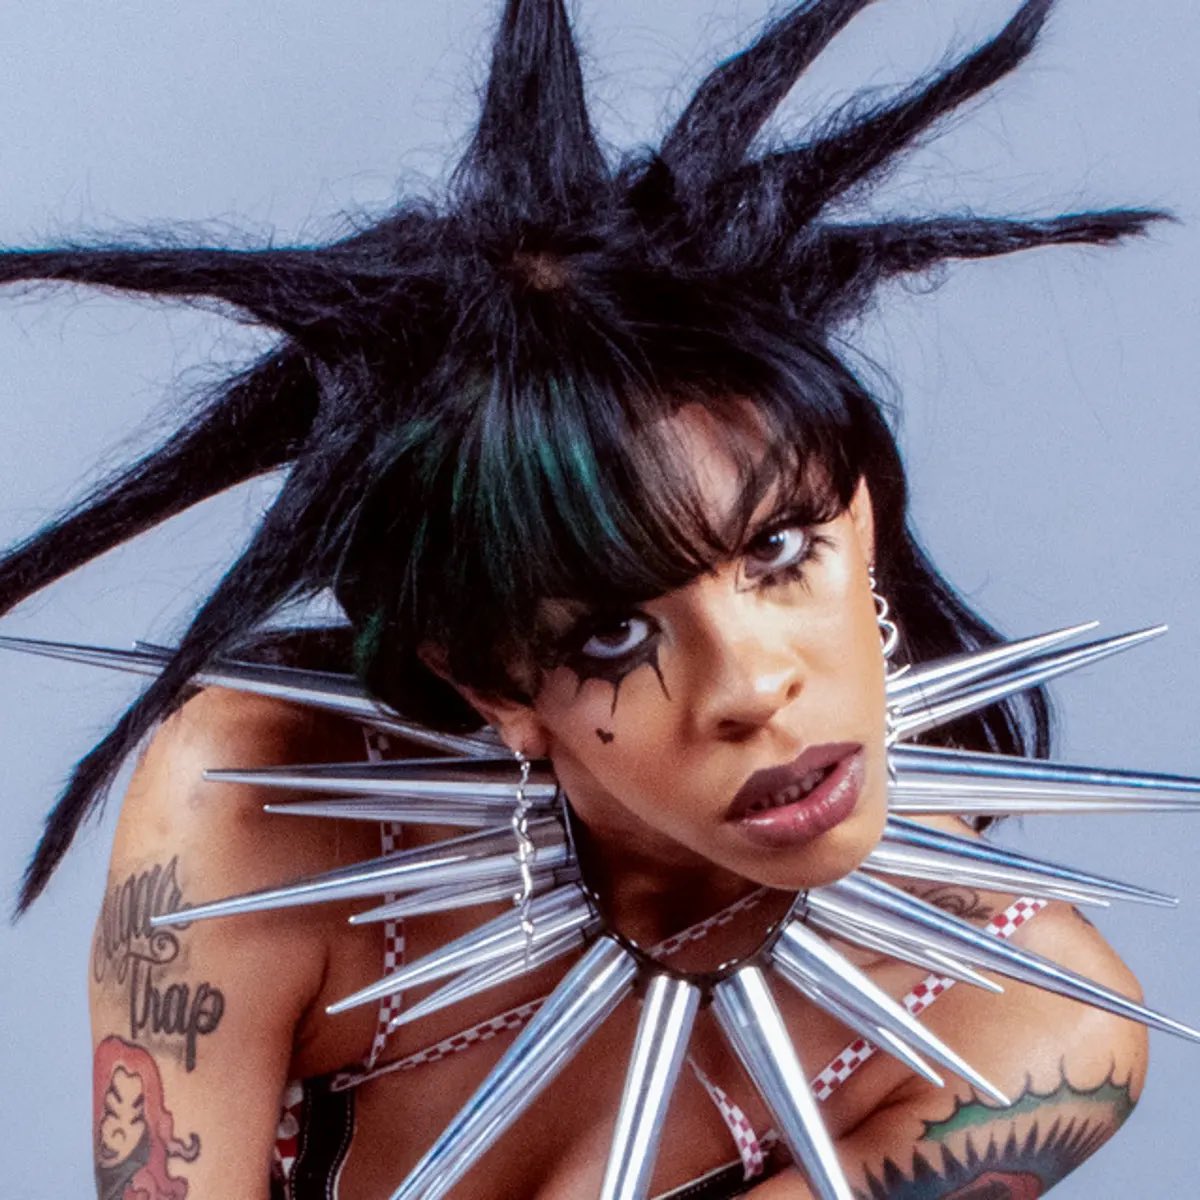 XG and Rico Nasty will release the remix to ‘Shooting Star’ this Friday, April 7th.